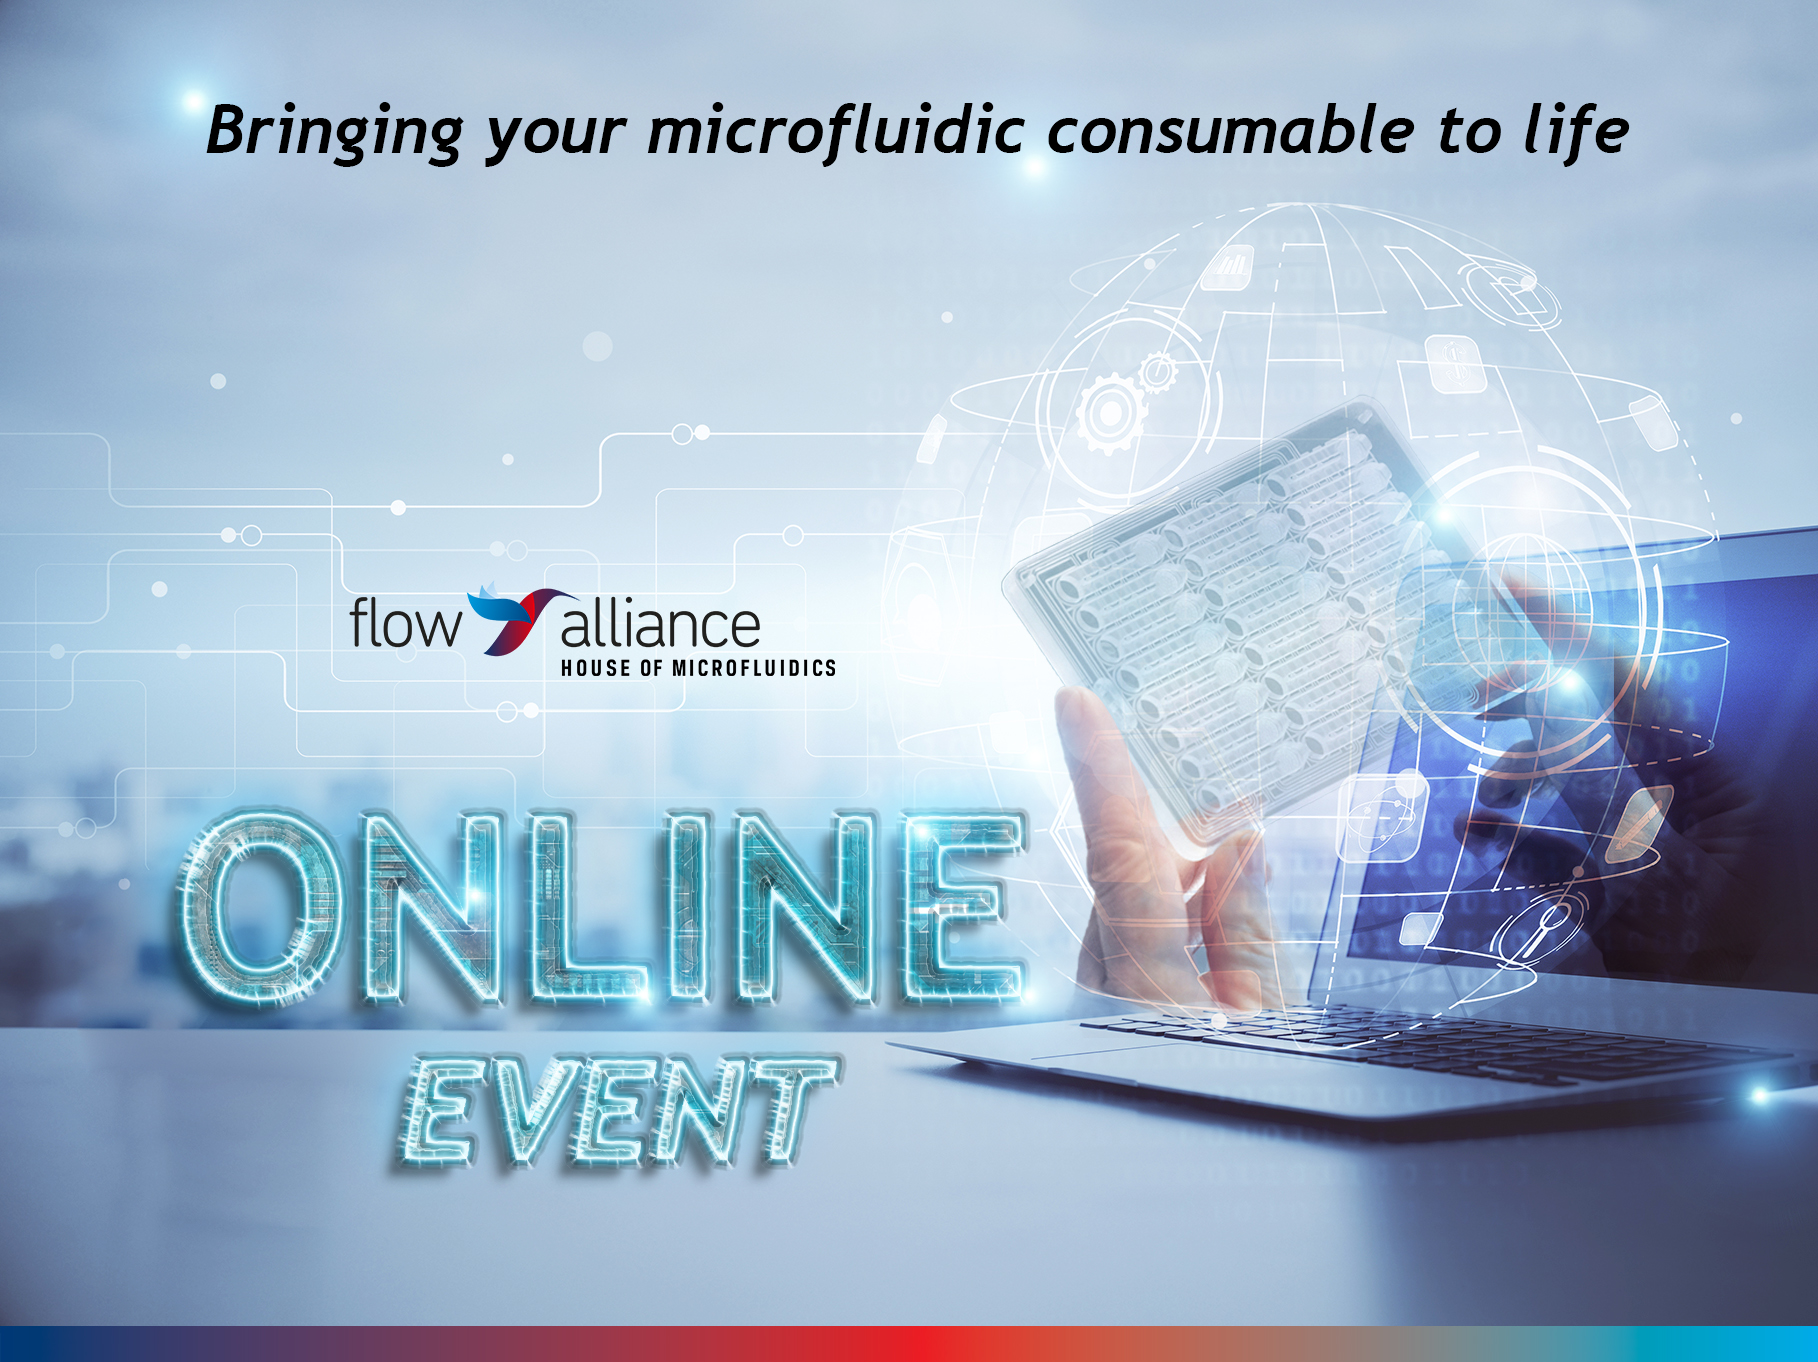 Event: Bringing your microfluidic consumable to life